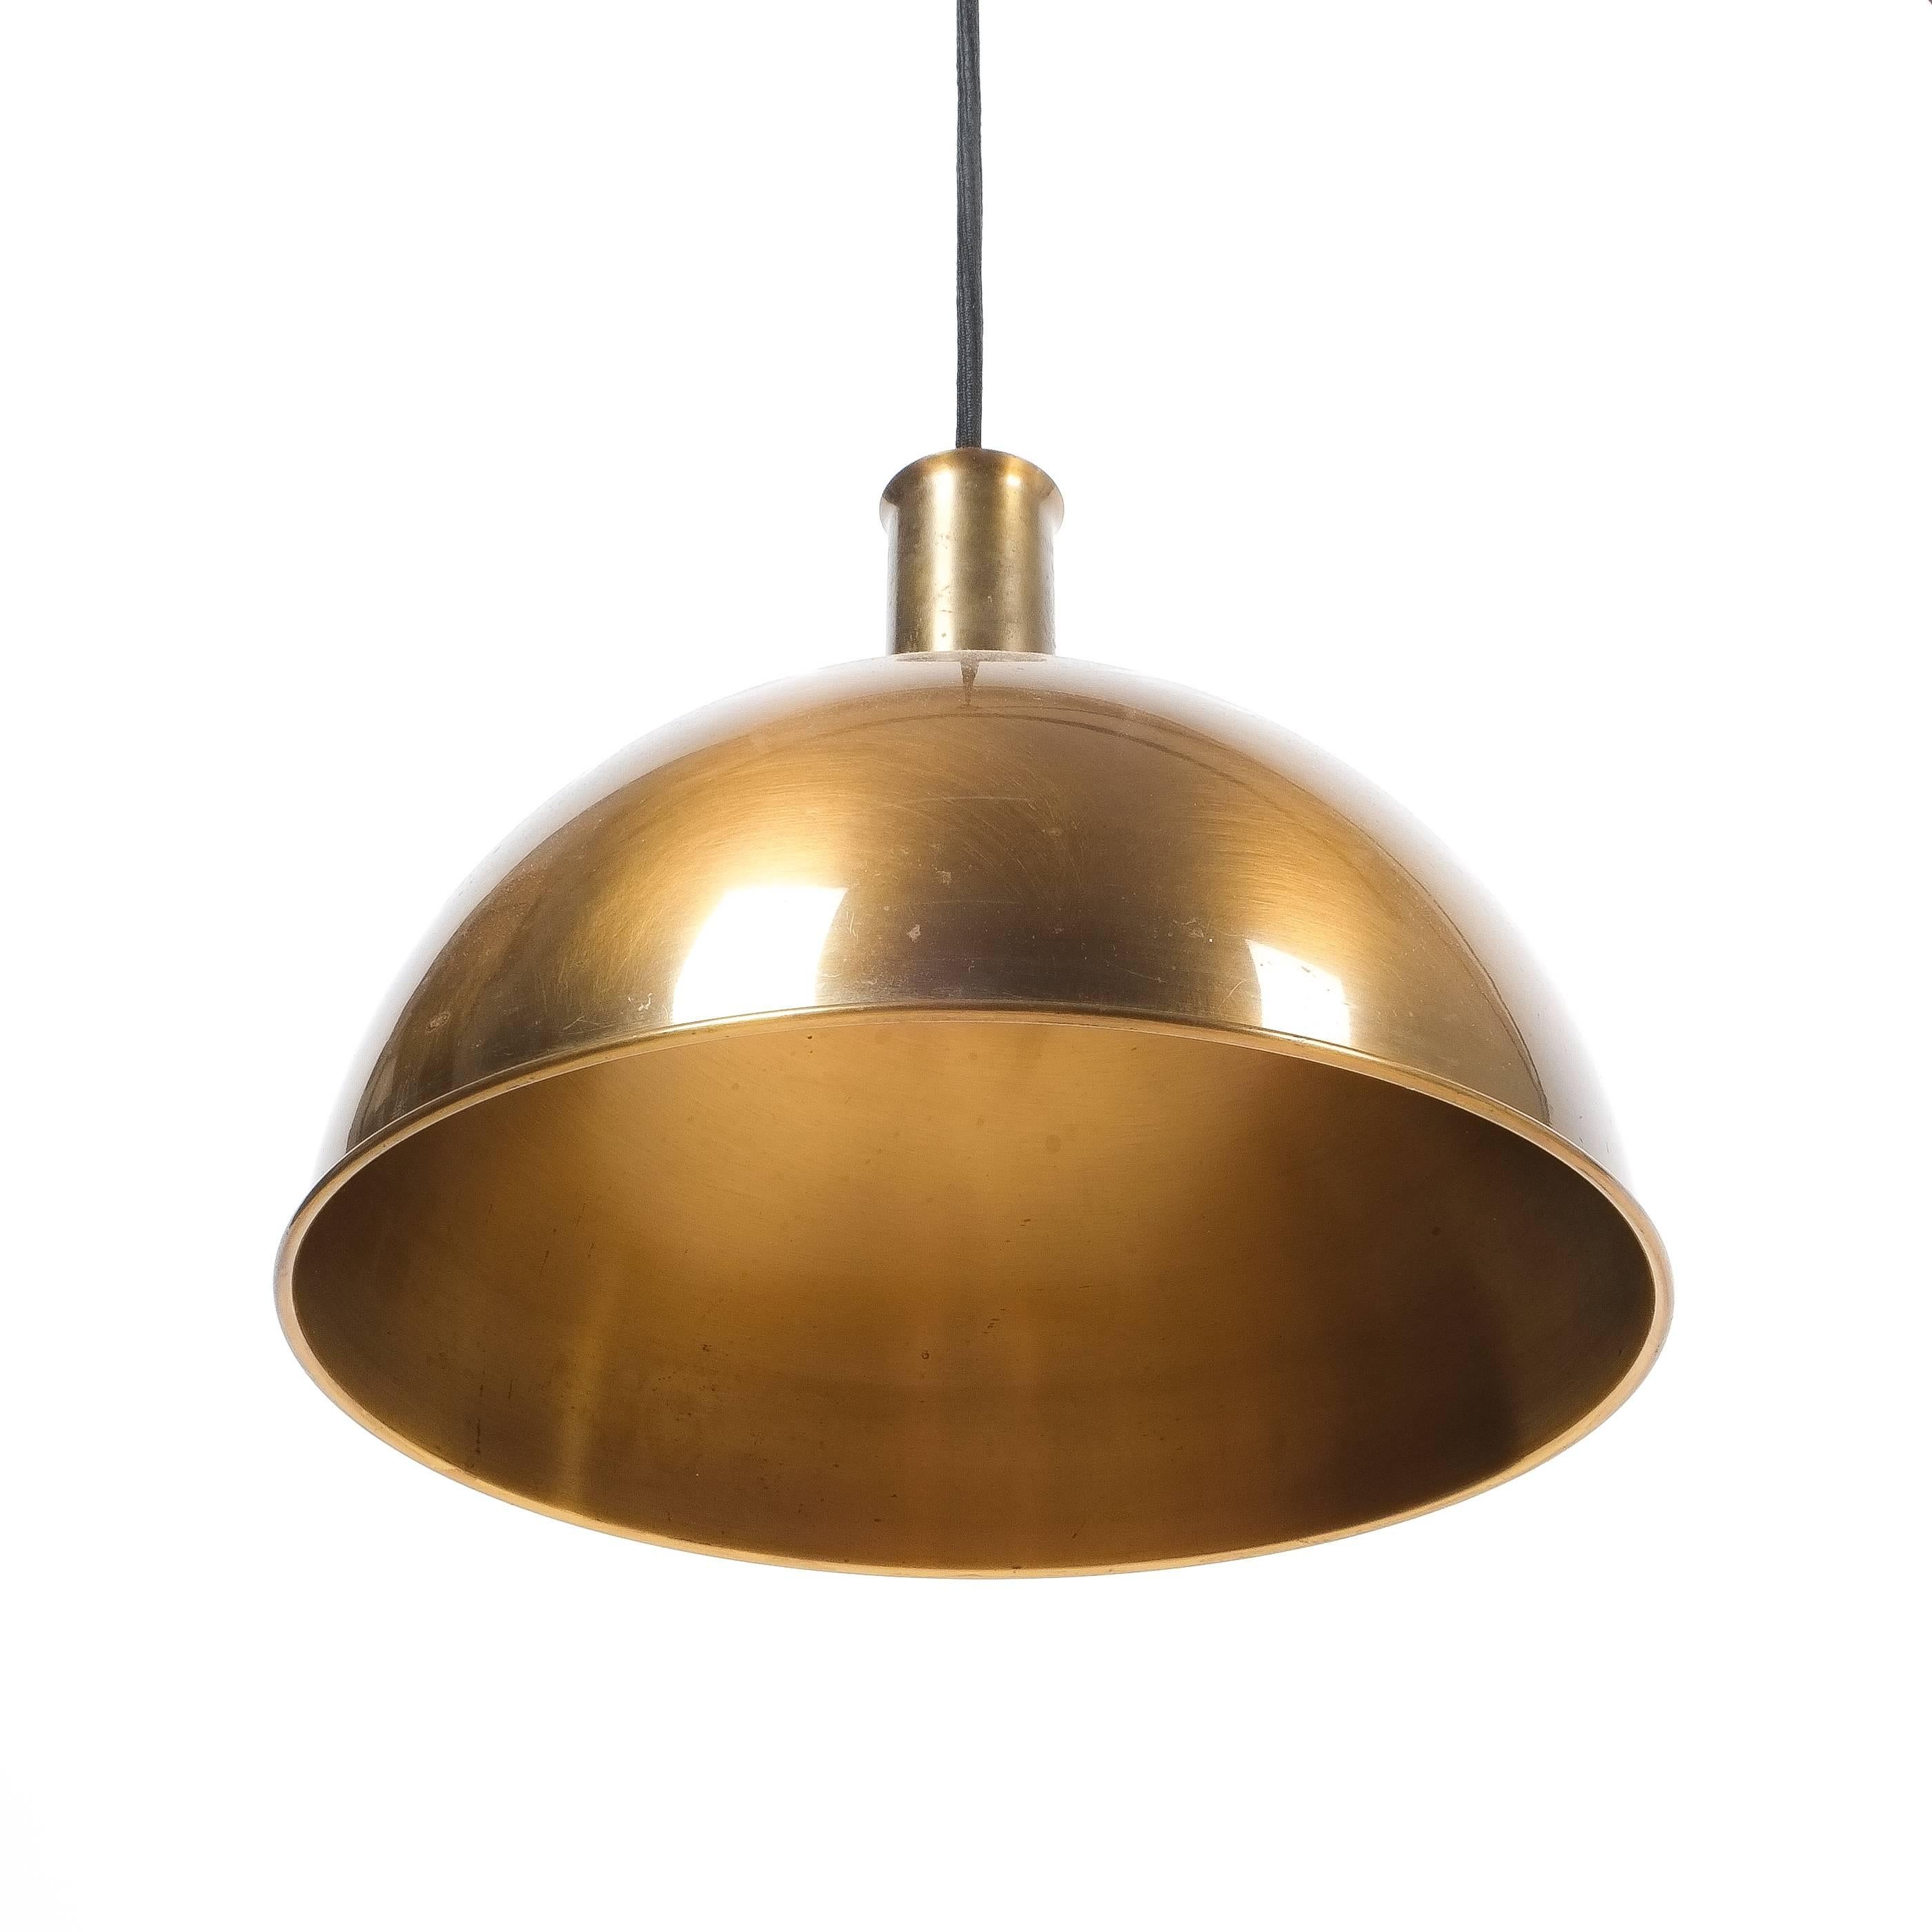 Burnished Florian Schulz Early Brass Counterbalance Pendant Lamp, 1960